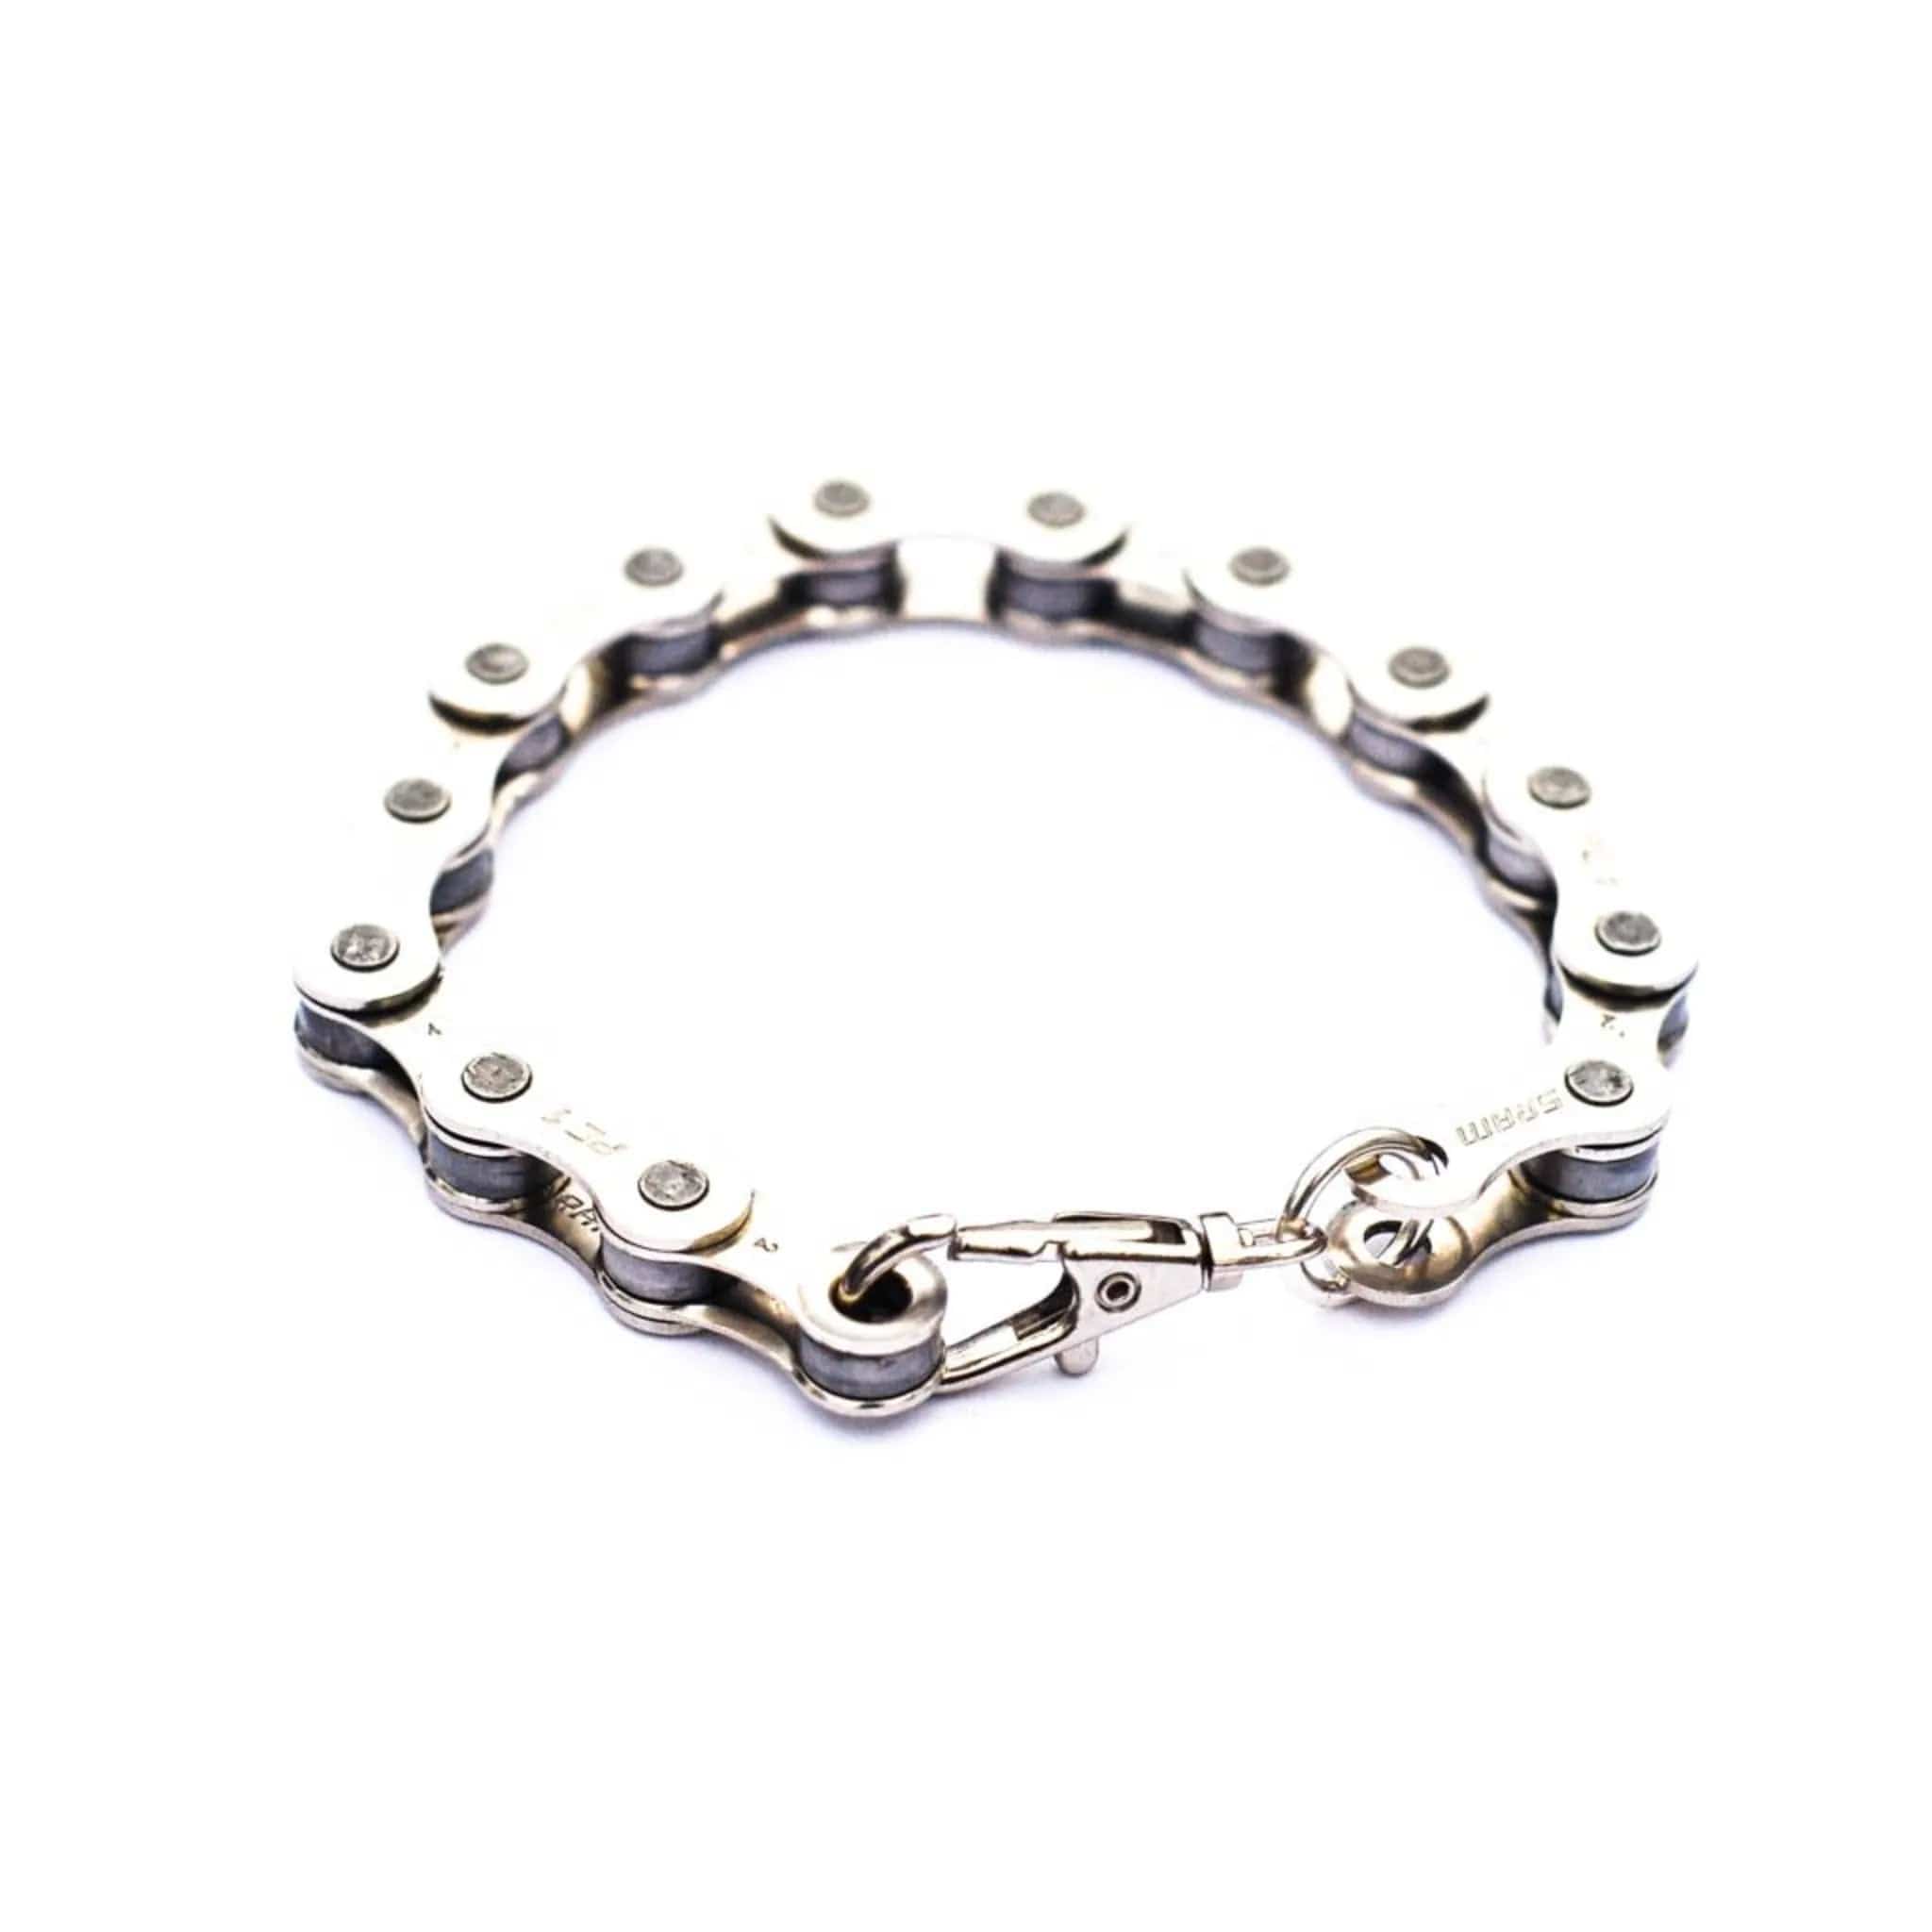 Two Tone Silver and Black Bike Chain Bracelet with White Crystals – Vance  Leather